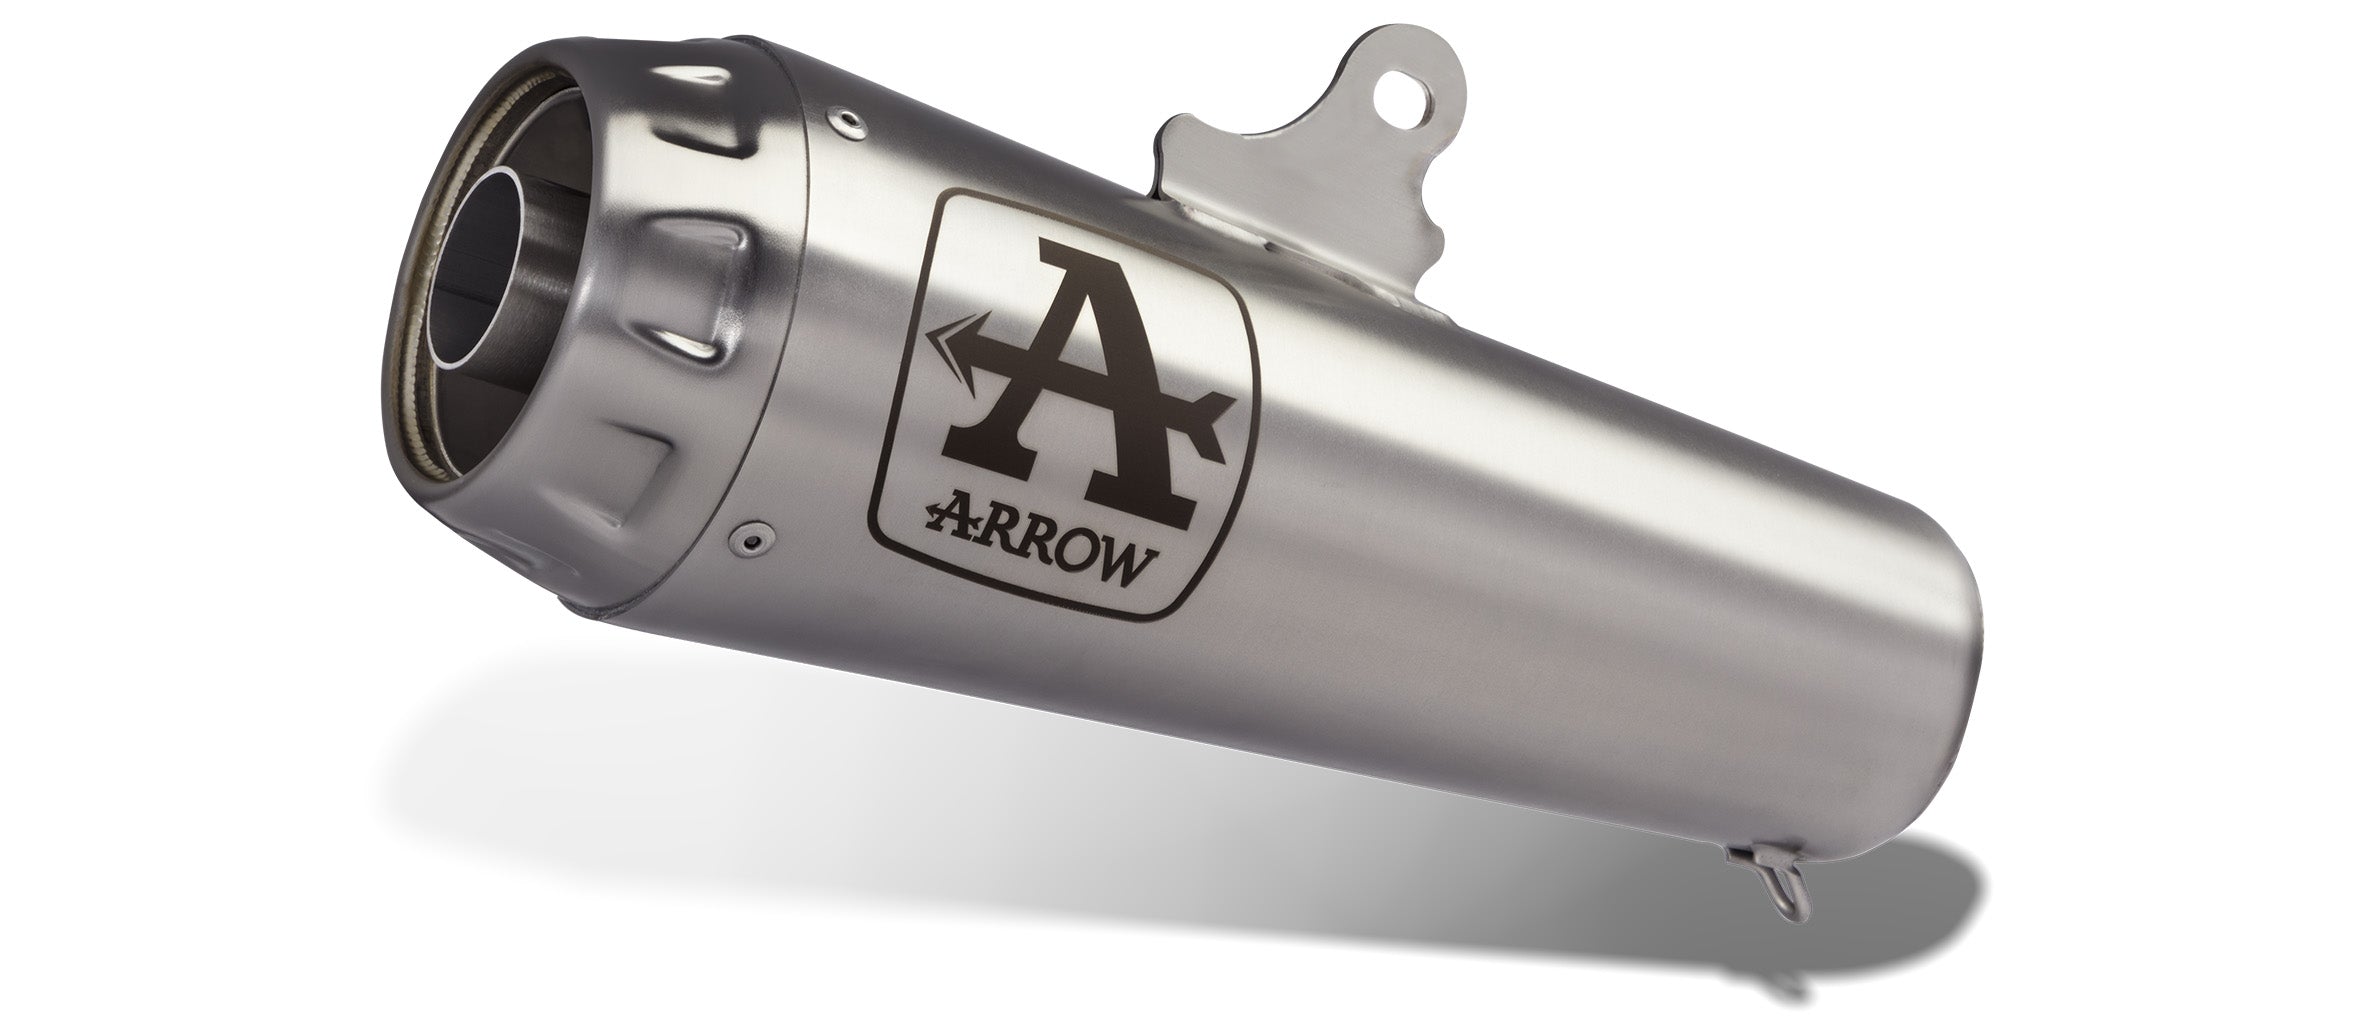 Arrow Honda Cb 1000r Homologated Nichrom Dark Pro-Race Silencer With Welded Link Pipe Low Version For Original And Arrow Coll.  71882prn